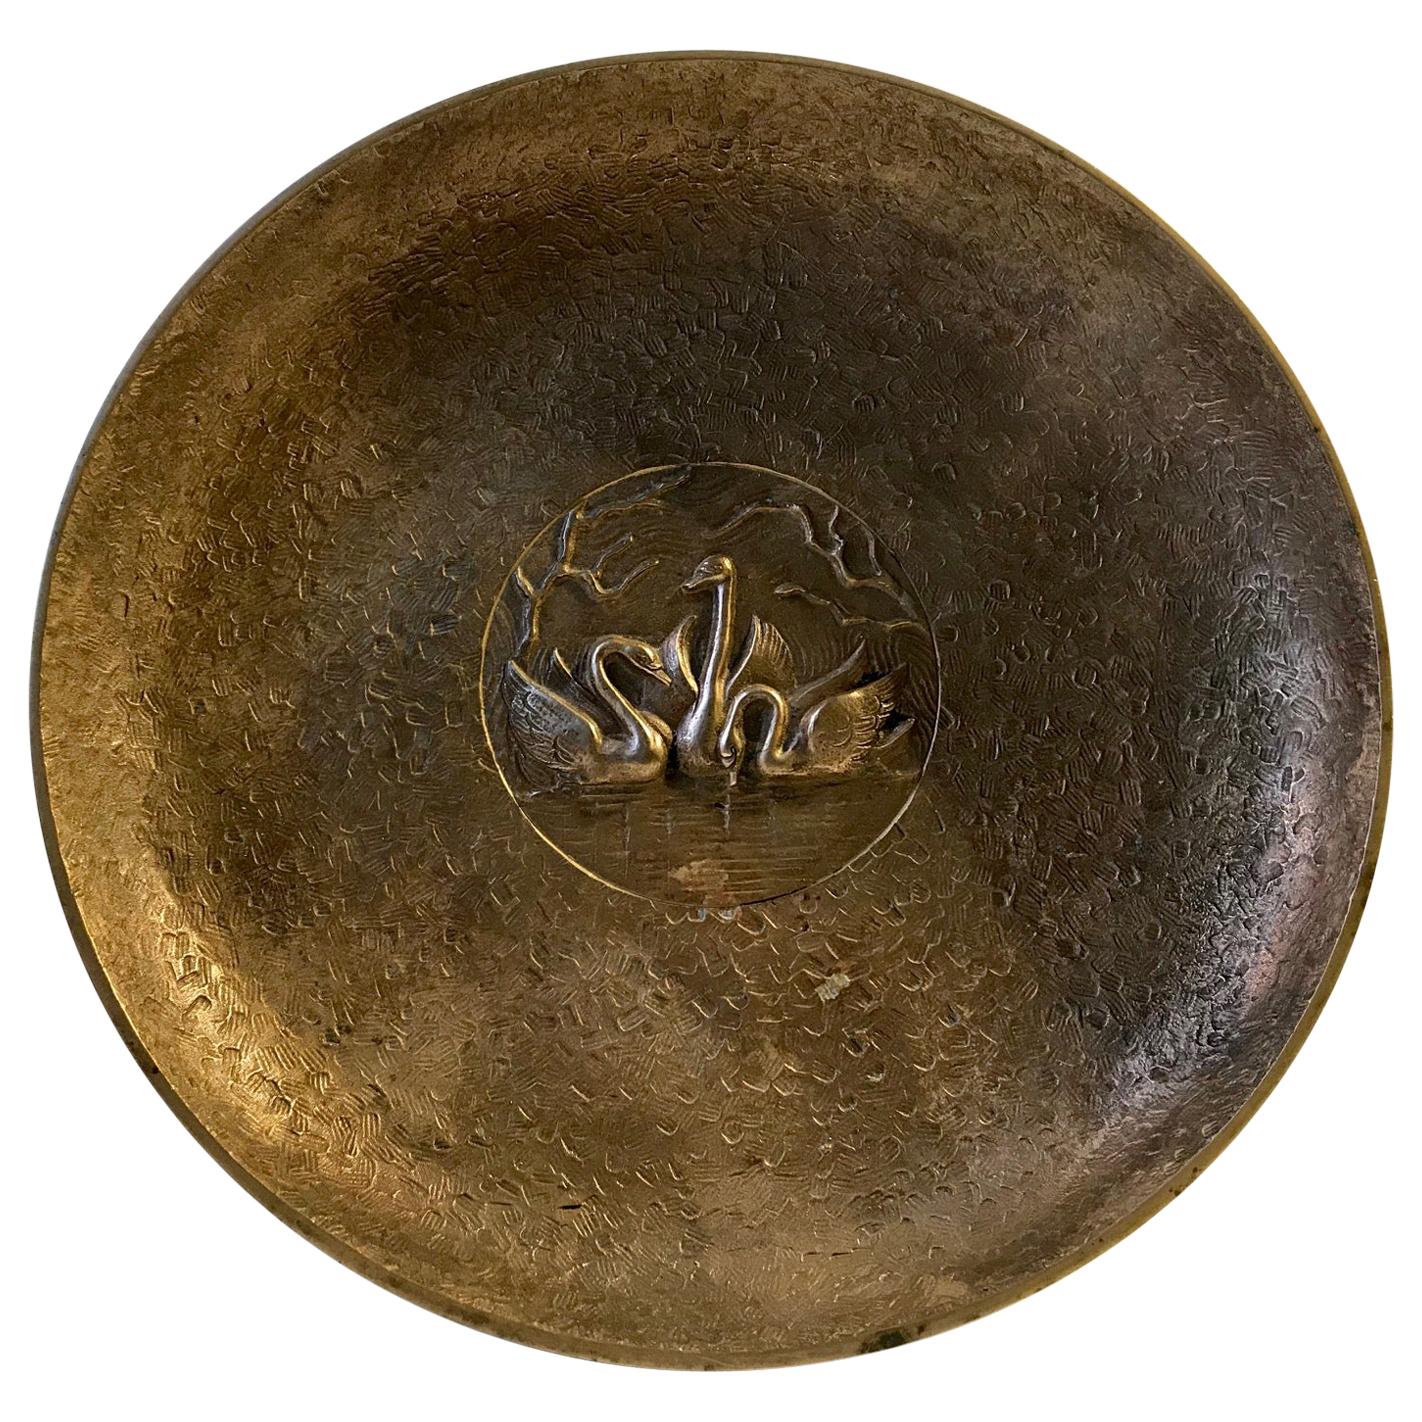 Tinos Art Deco Bronze Dish with Swans, 1930s For Sale